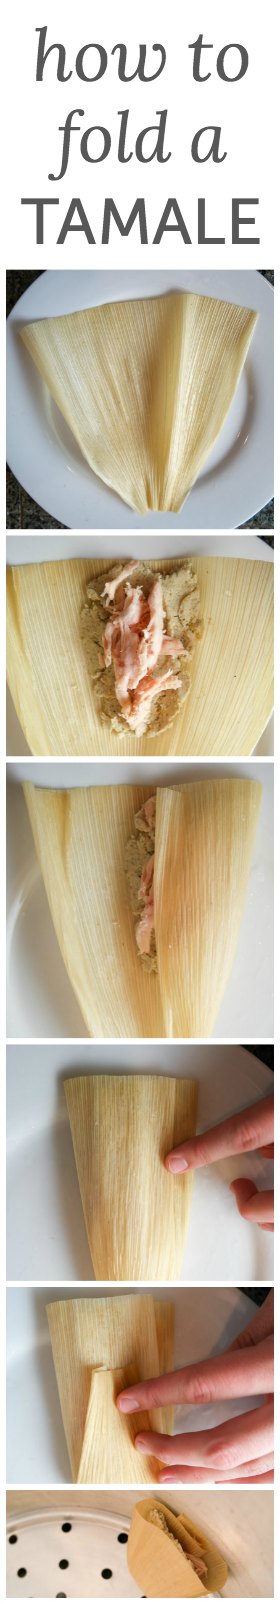 How to fold a tamale. It's not rocket science, I promise.